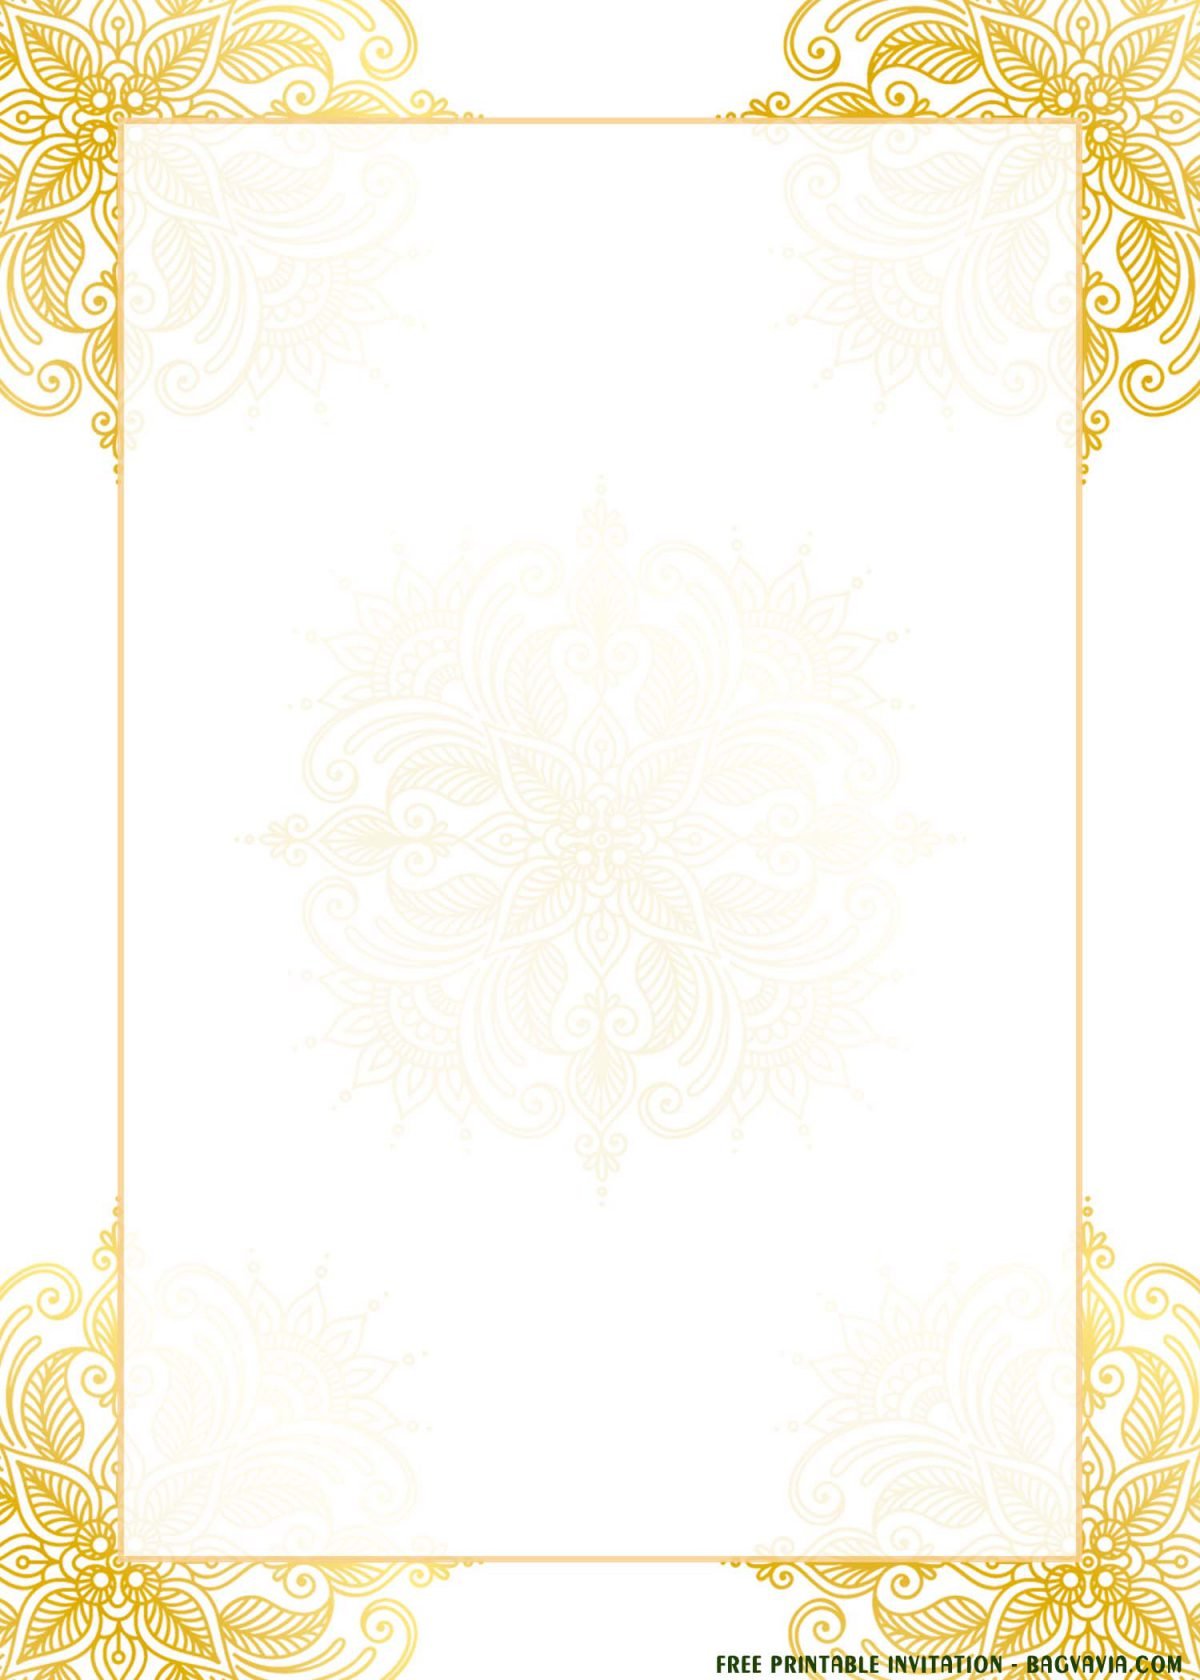 Free Printable Gold Lace Invitation Templates For Any Occasions With Gold Lace Trims